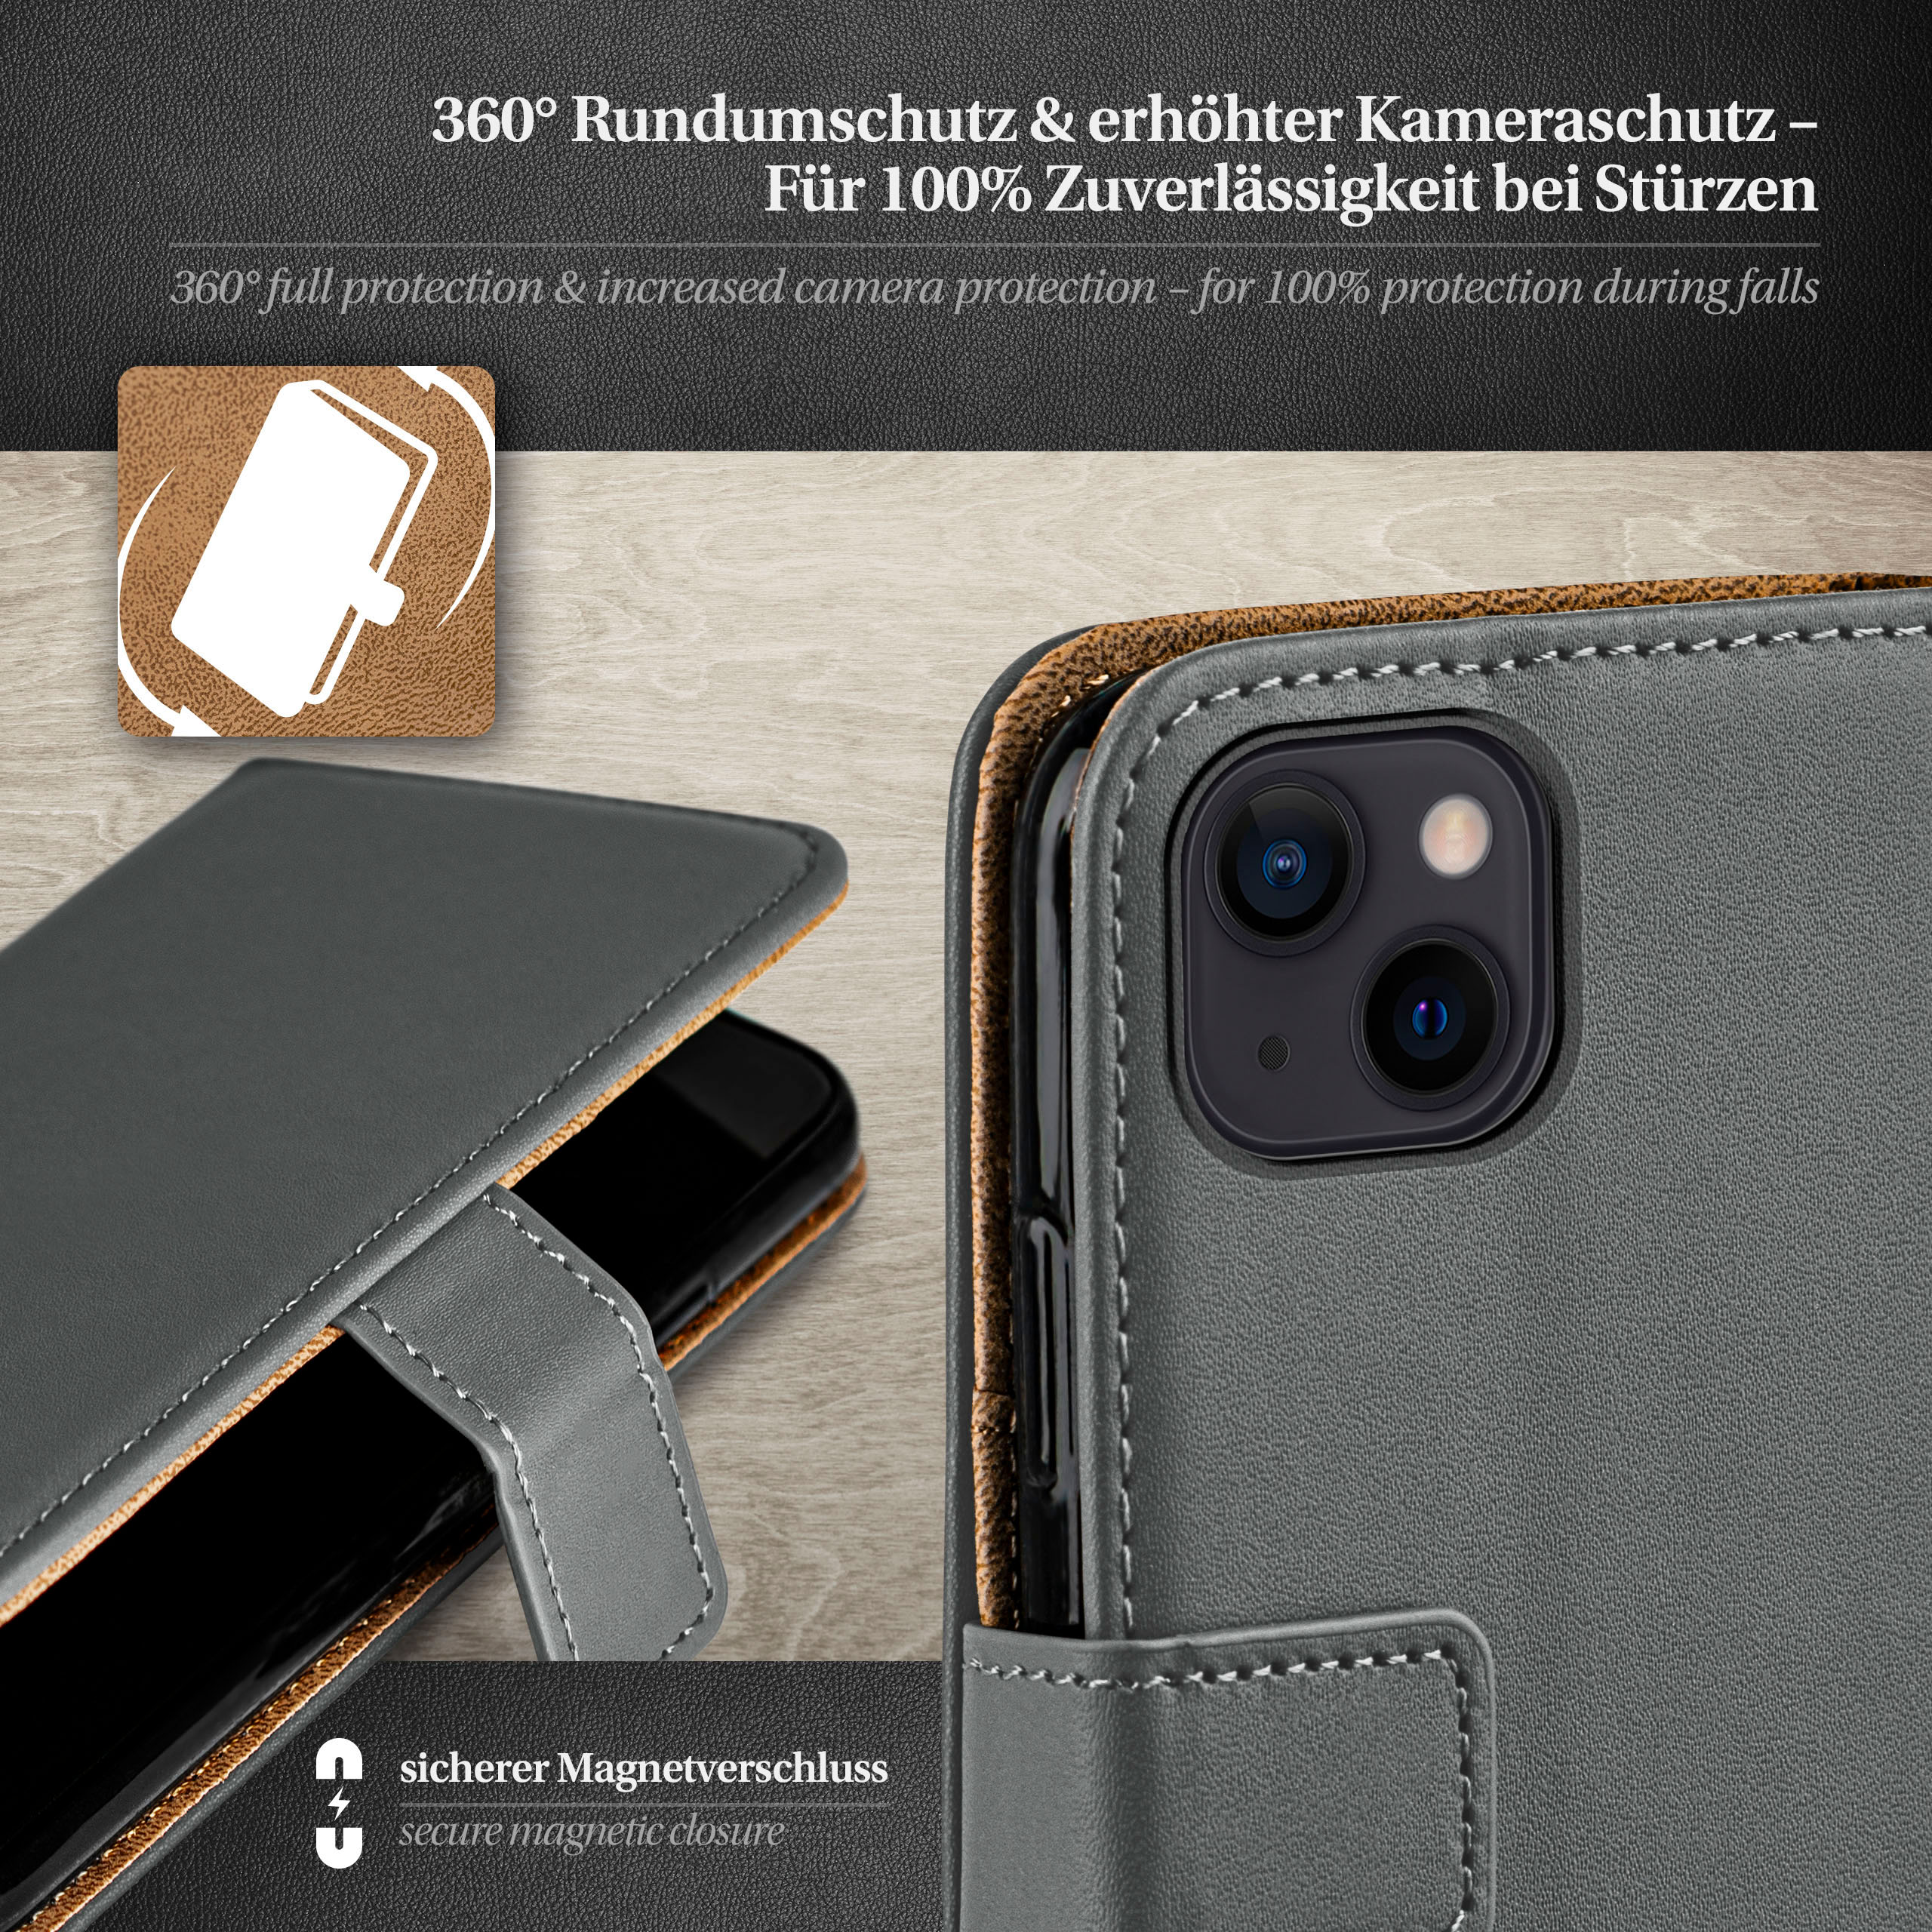 Book Apple, iPhone Anthracite-Gray 13, MOEX Bookcover, Case,